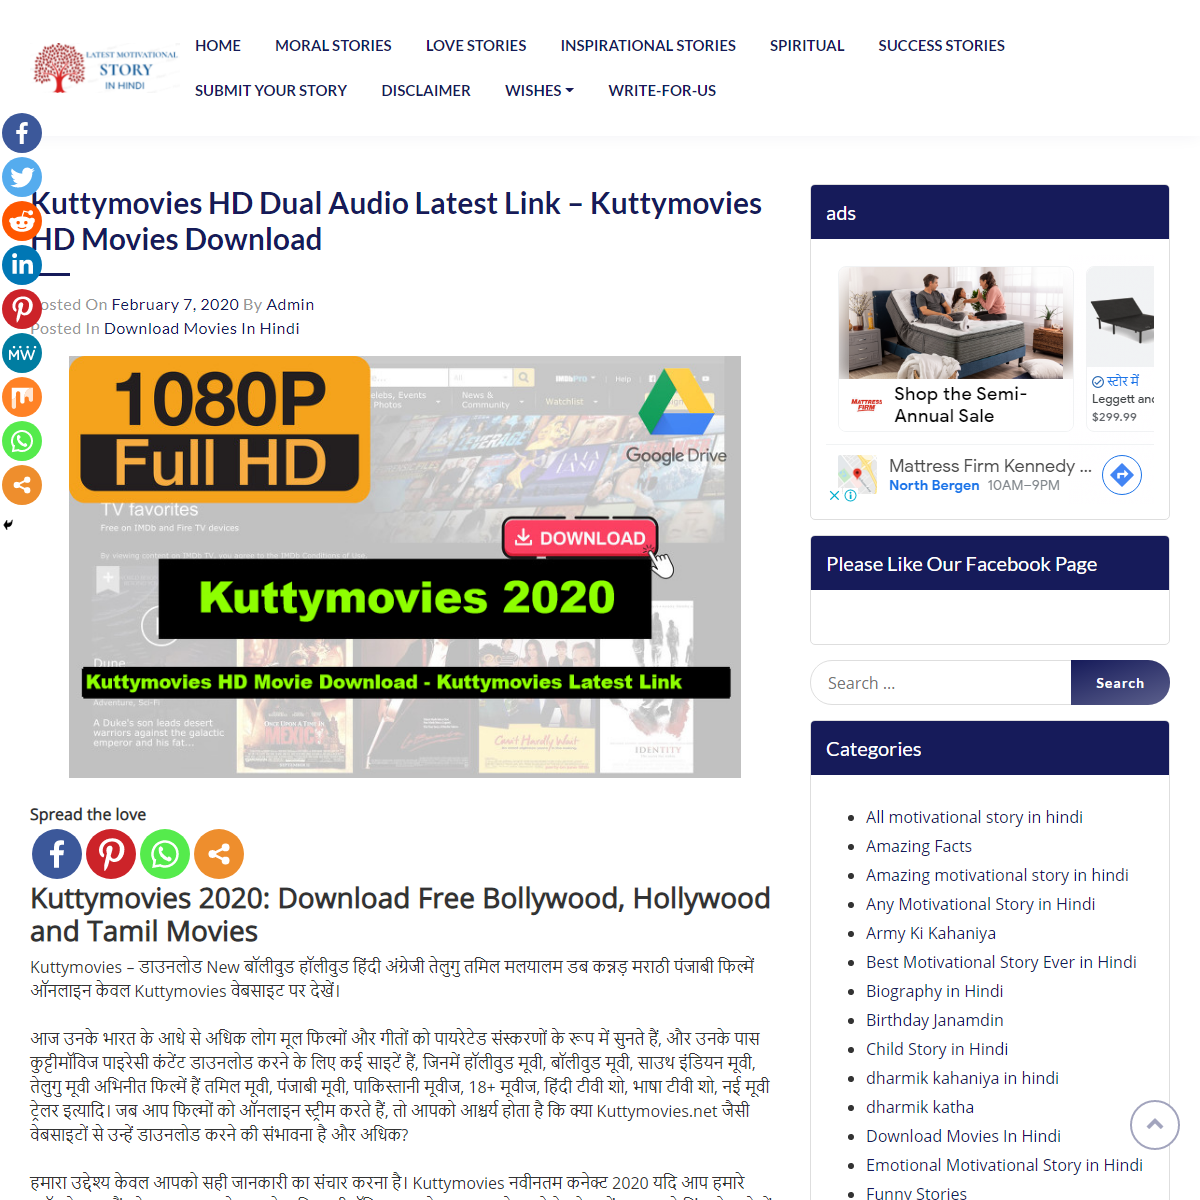 A complete backup of https://www.motivationalstoriesinhindi.com/kuttymovies-2020-download-free-movies/